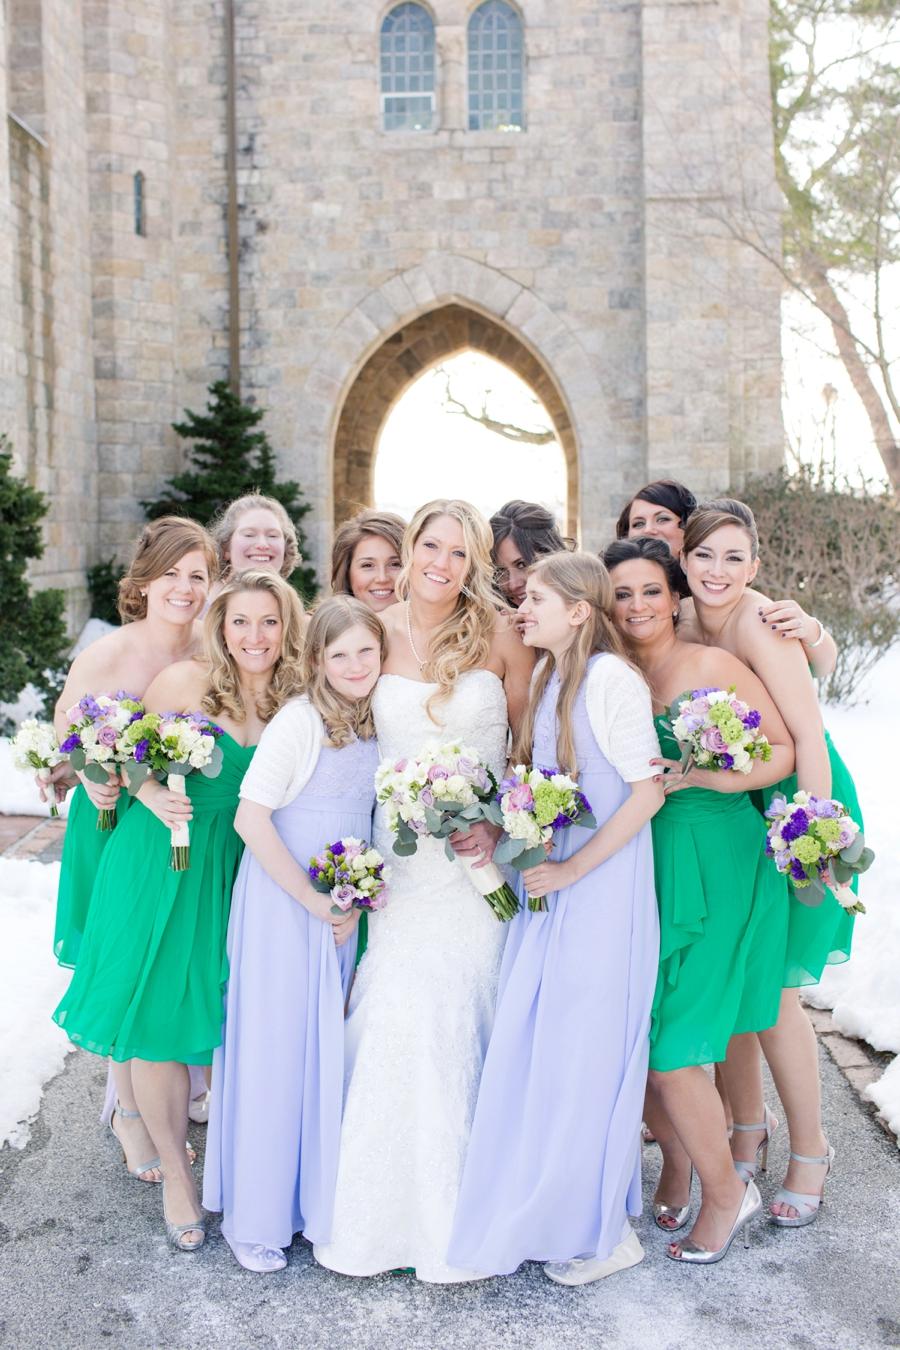 St. Patrick's Day Wedding at Cairnwood Estate Adrienne Matz Photography Philly in Love Philadelphia Weddings Vendors